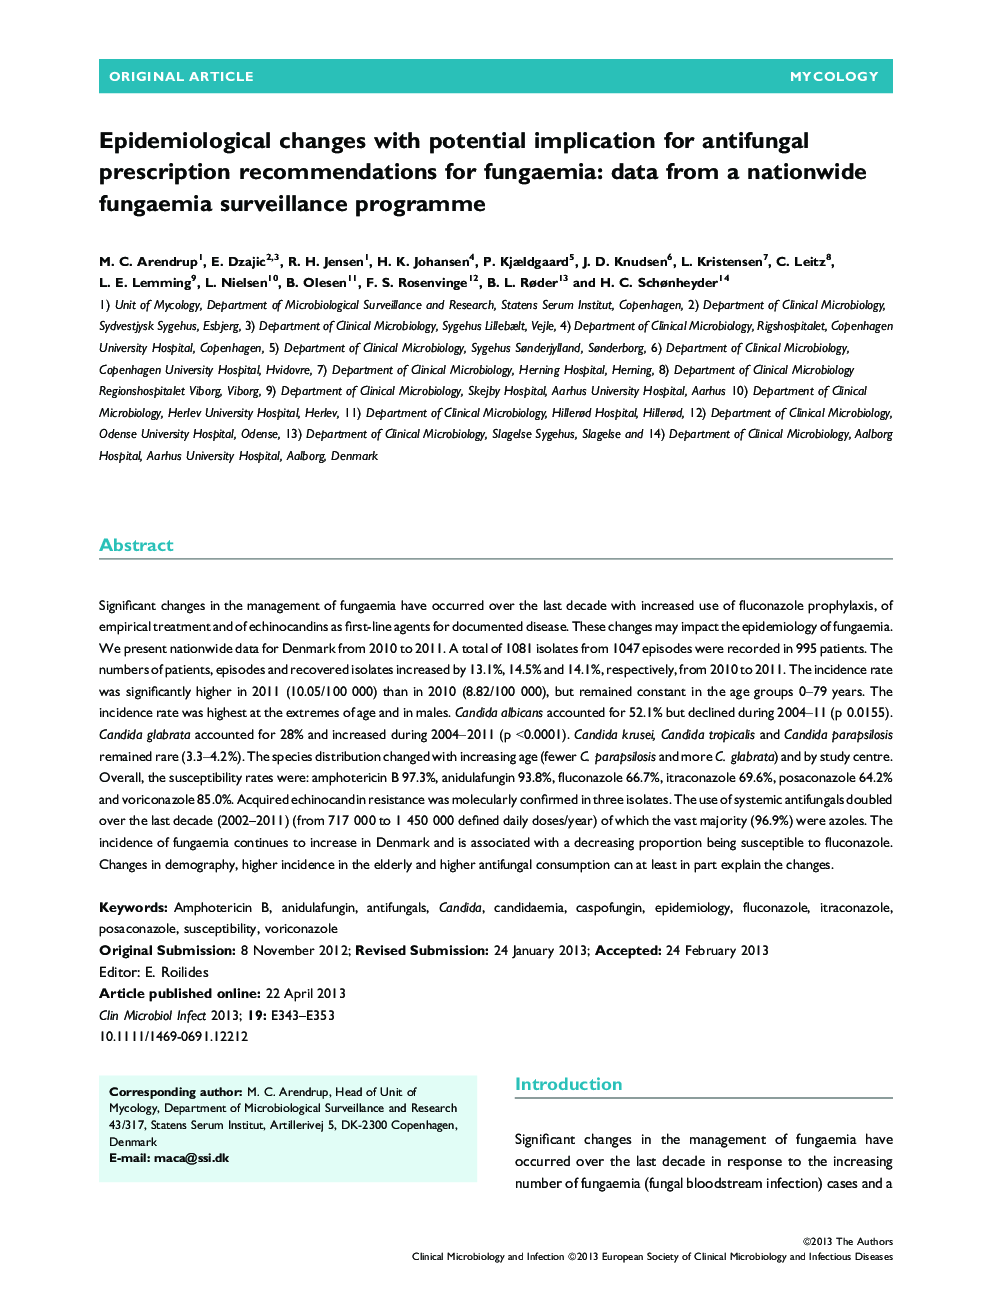 Epidemiological changes with potential implication for antifungal prescription recommendations for fungaemia: data from a nationwide fungaemia surveillance programme 